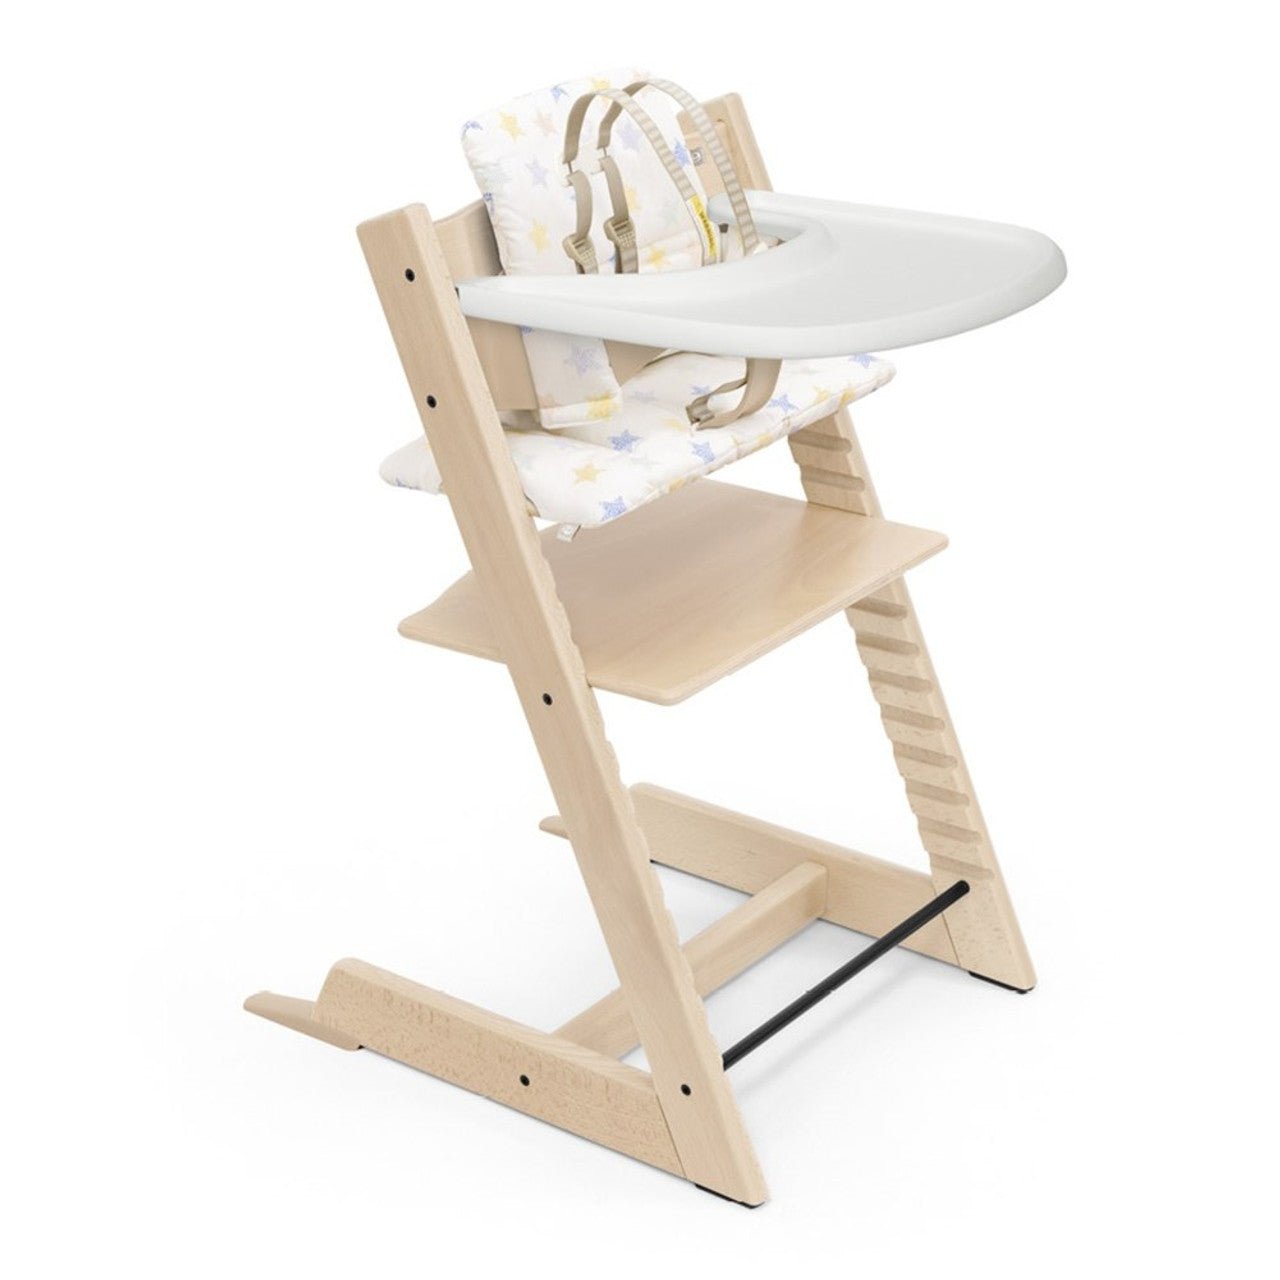 STOKKE Tripp Trapp High Chair Complete with Cushion and Tray - ANB Baby -7040356433001$300 - $500